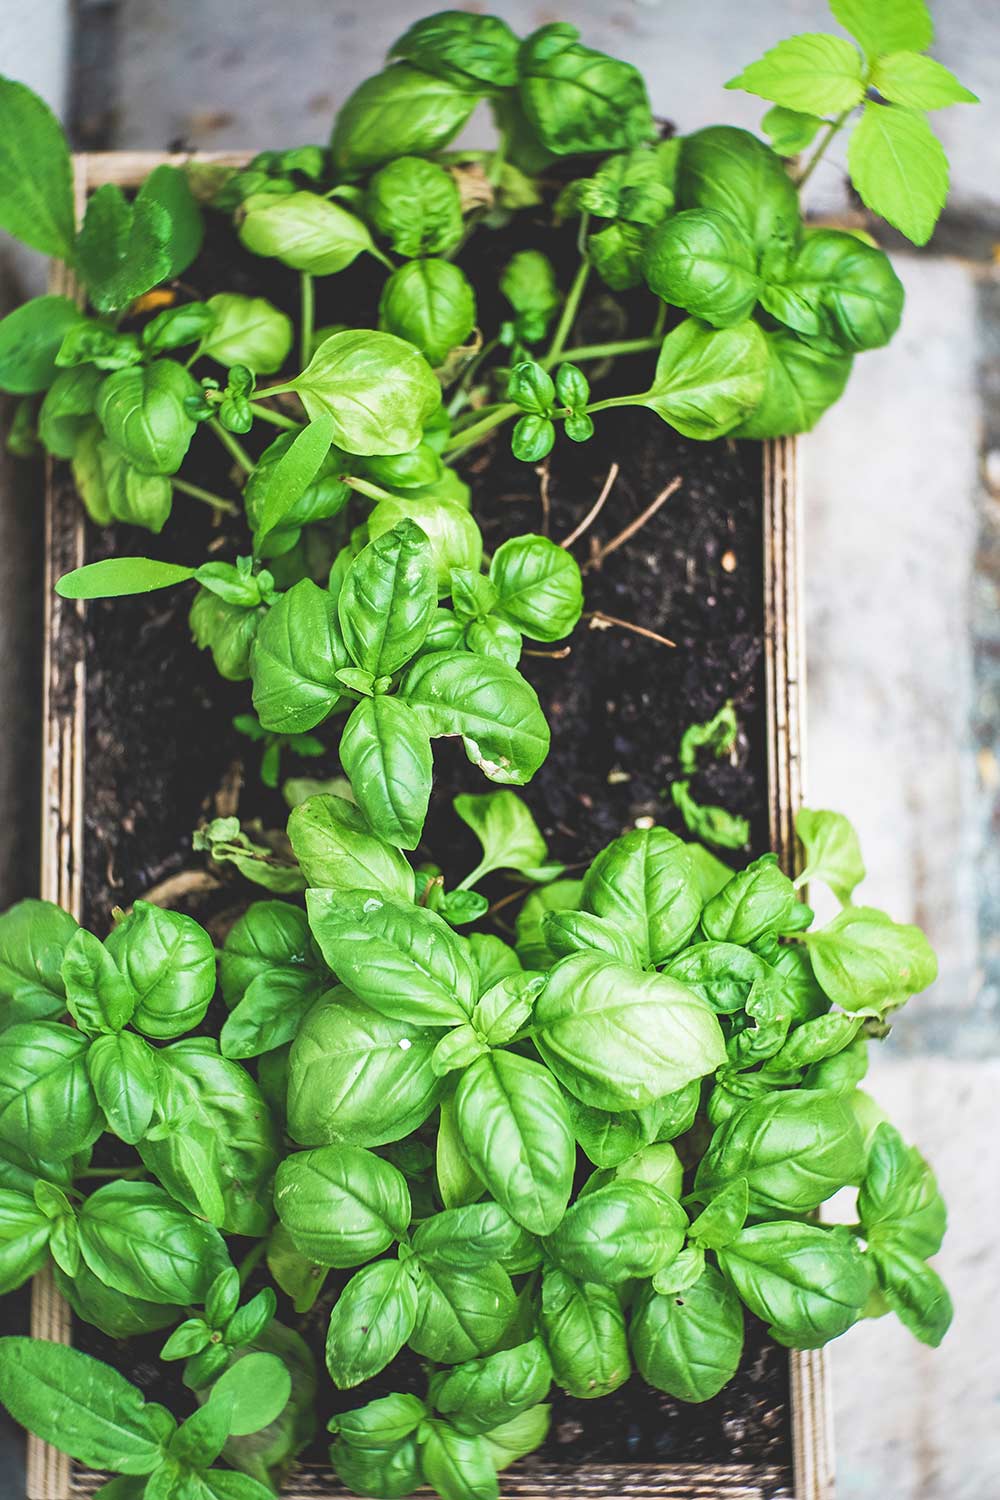 Grow your own basil at home - Carousell Philippines